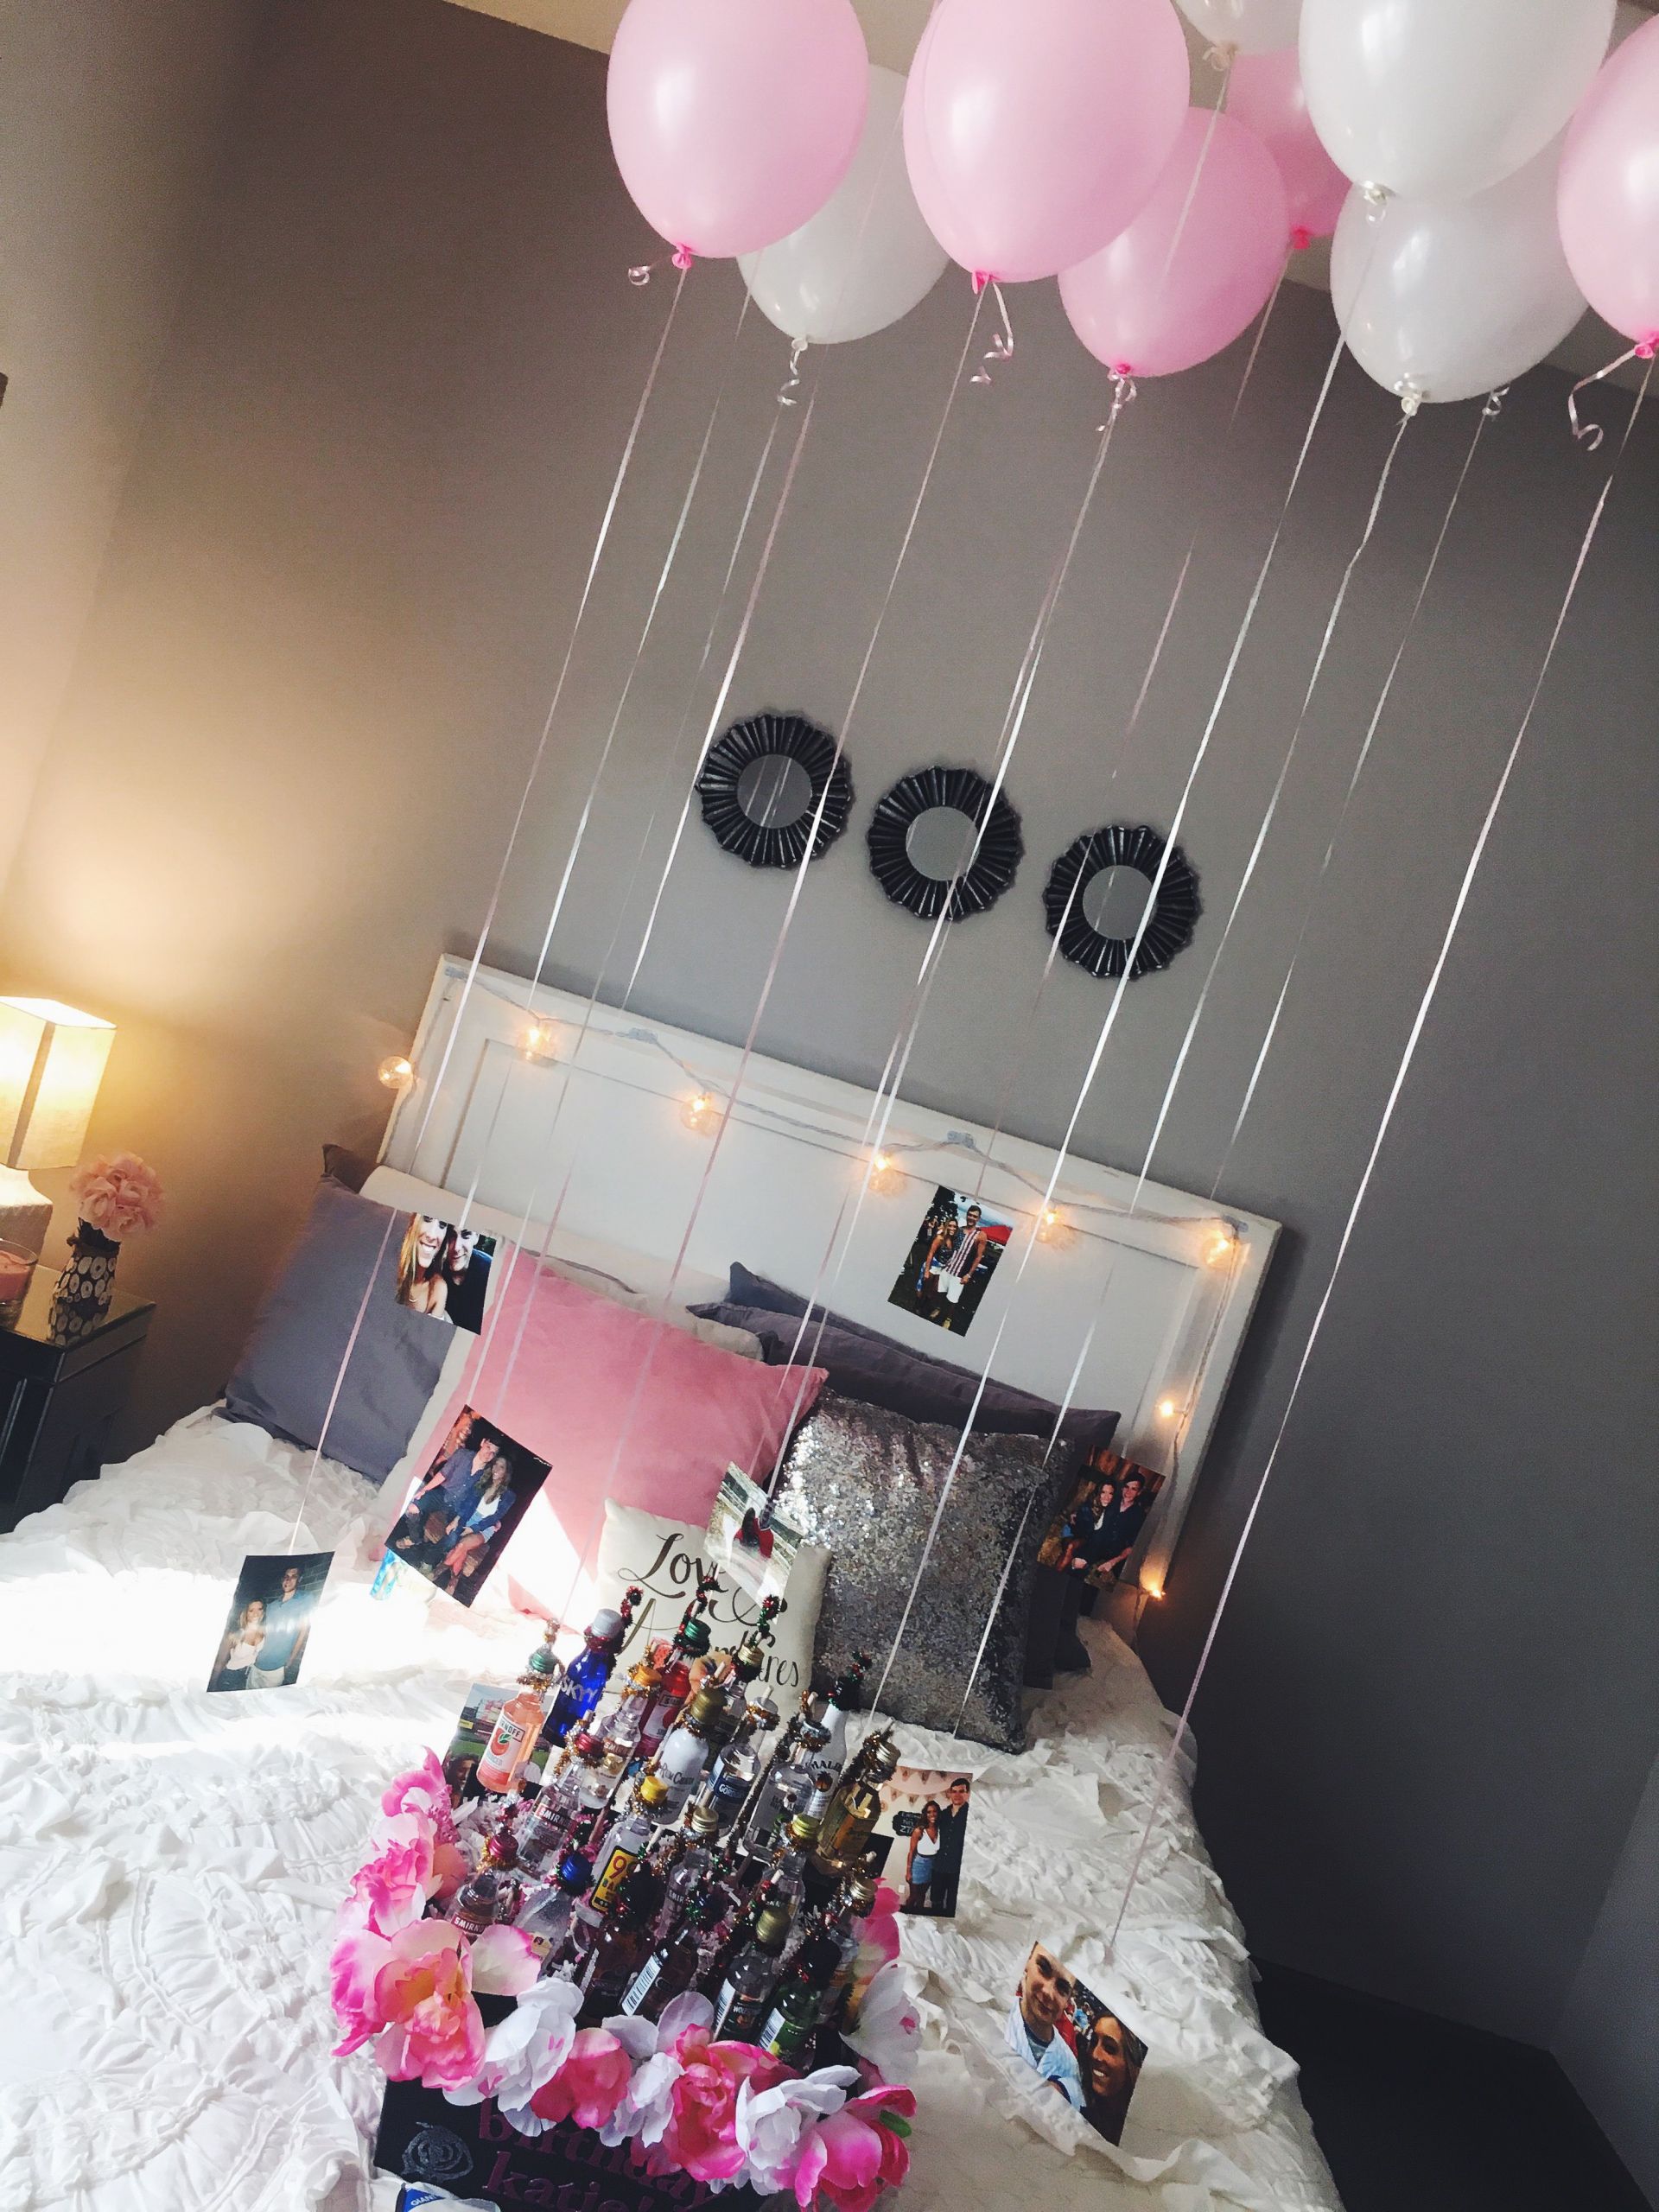 Birthday Gift Ideas For Your Girlfriend
 easy and cute decorations for a friend or girlfriends 21st